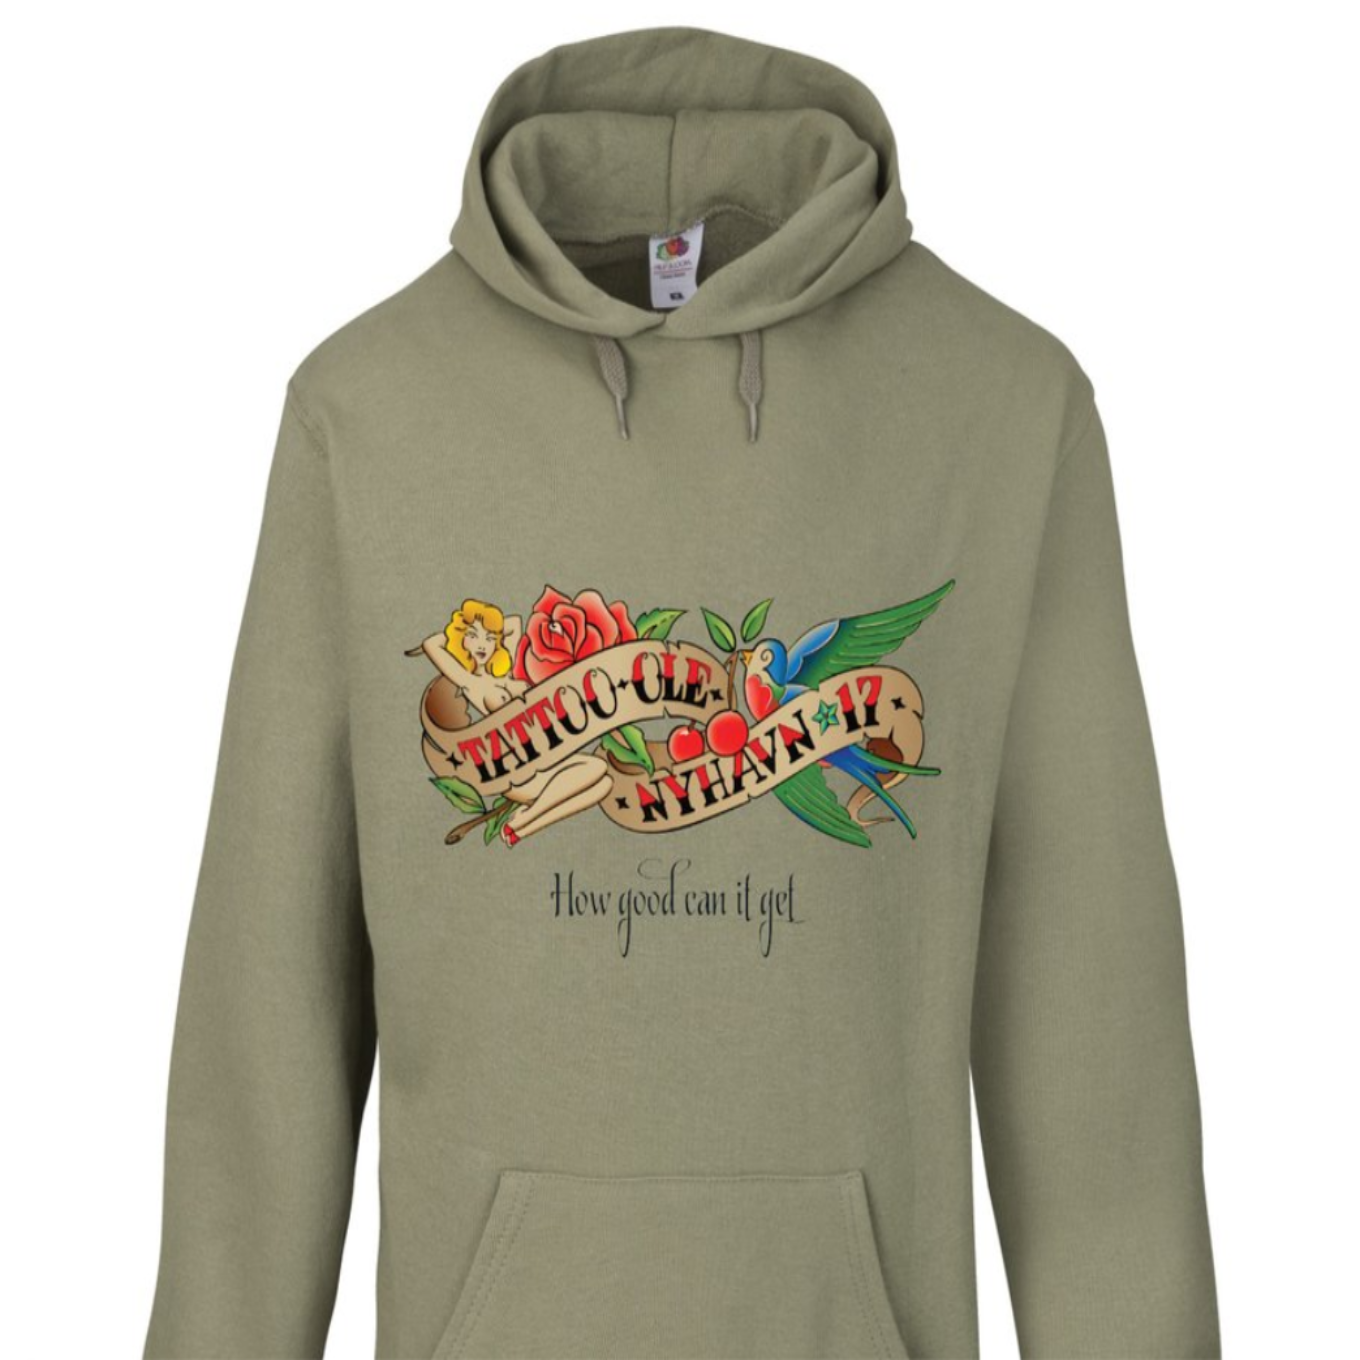 Green hoodie with Tattoo Ole & Nyhavn 17 design